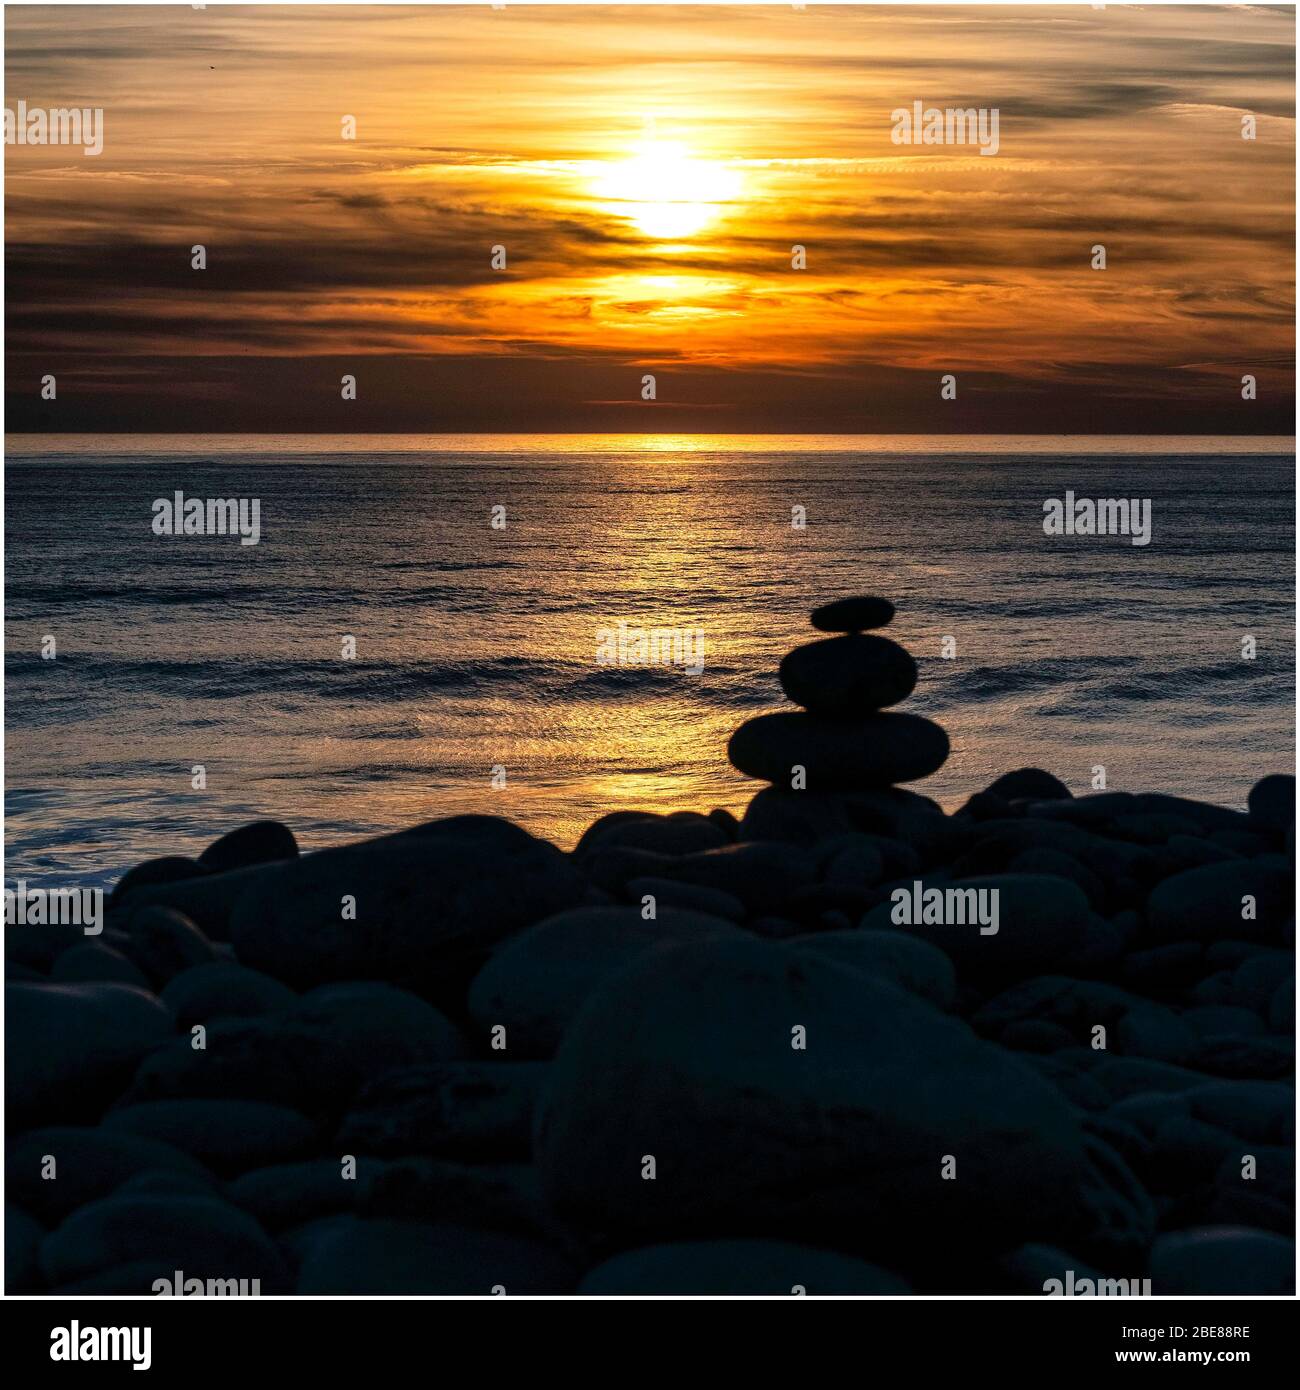 Stacked pebbles at sunset Stock Photo